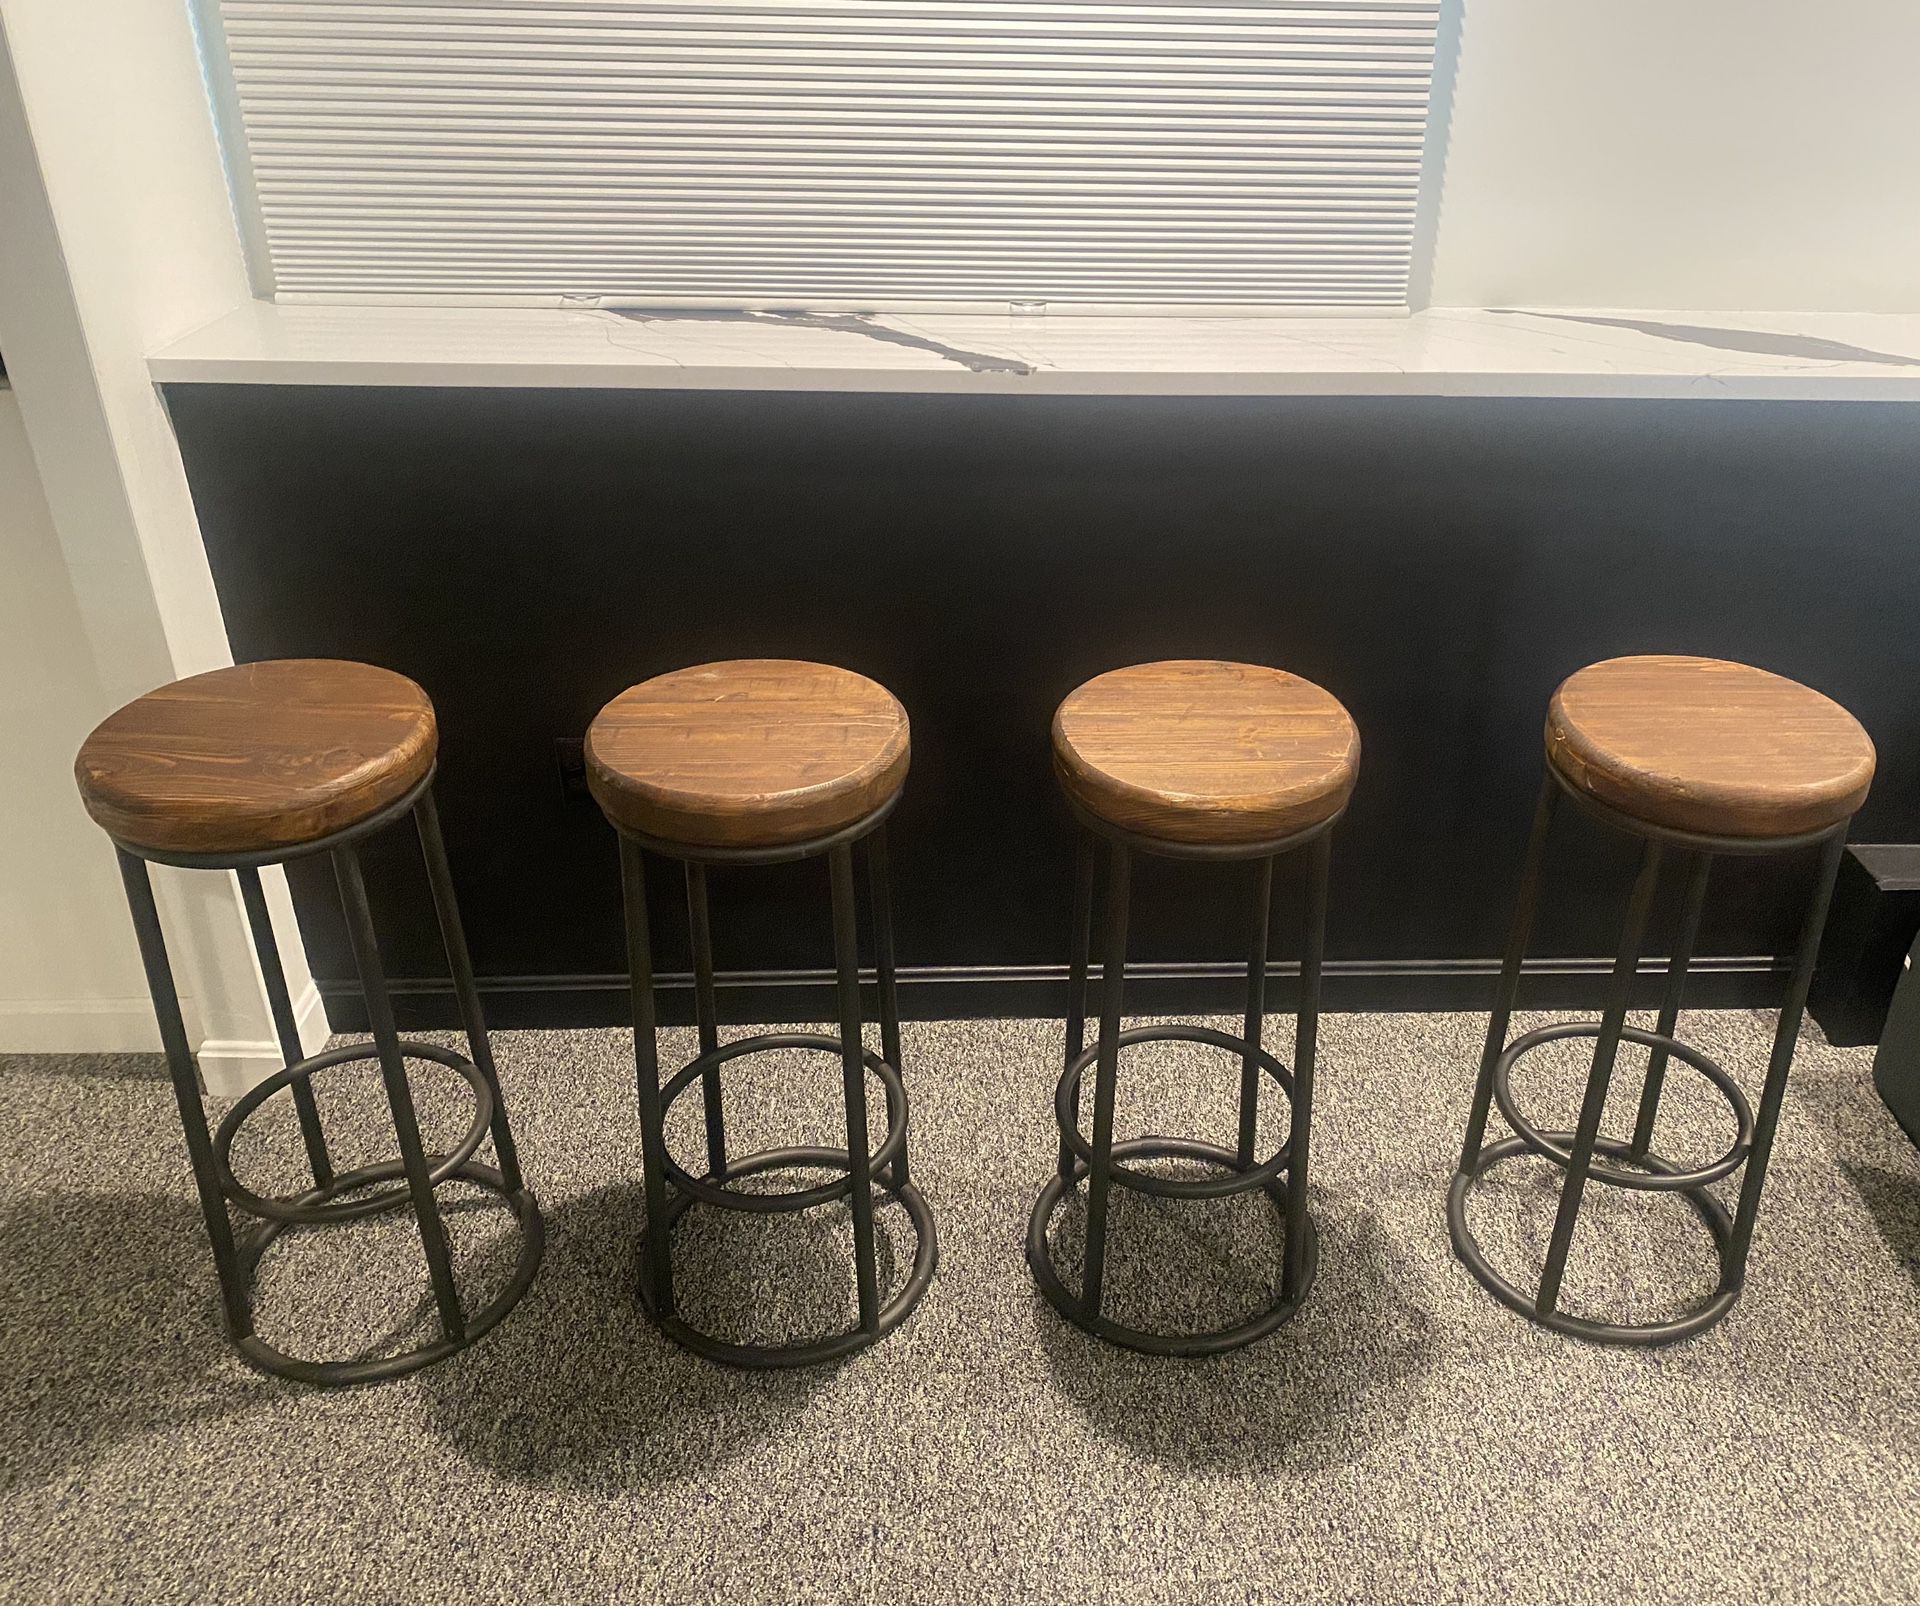 Set of Stools For Sale.